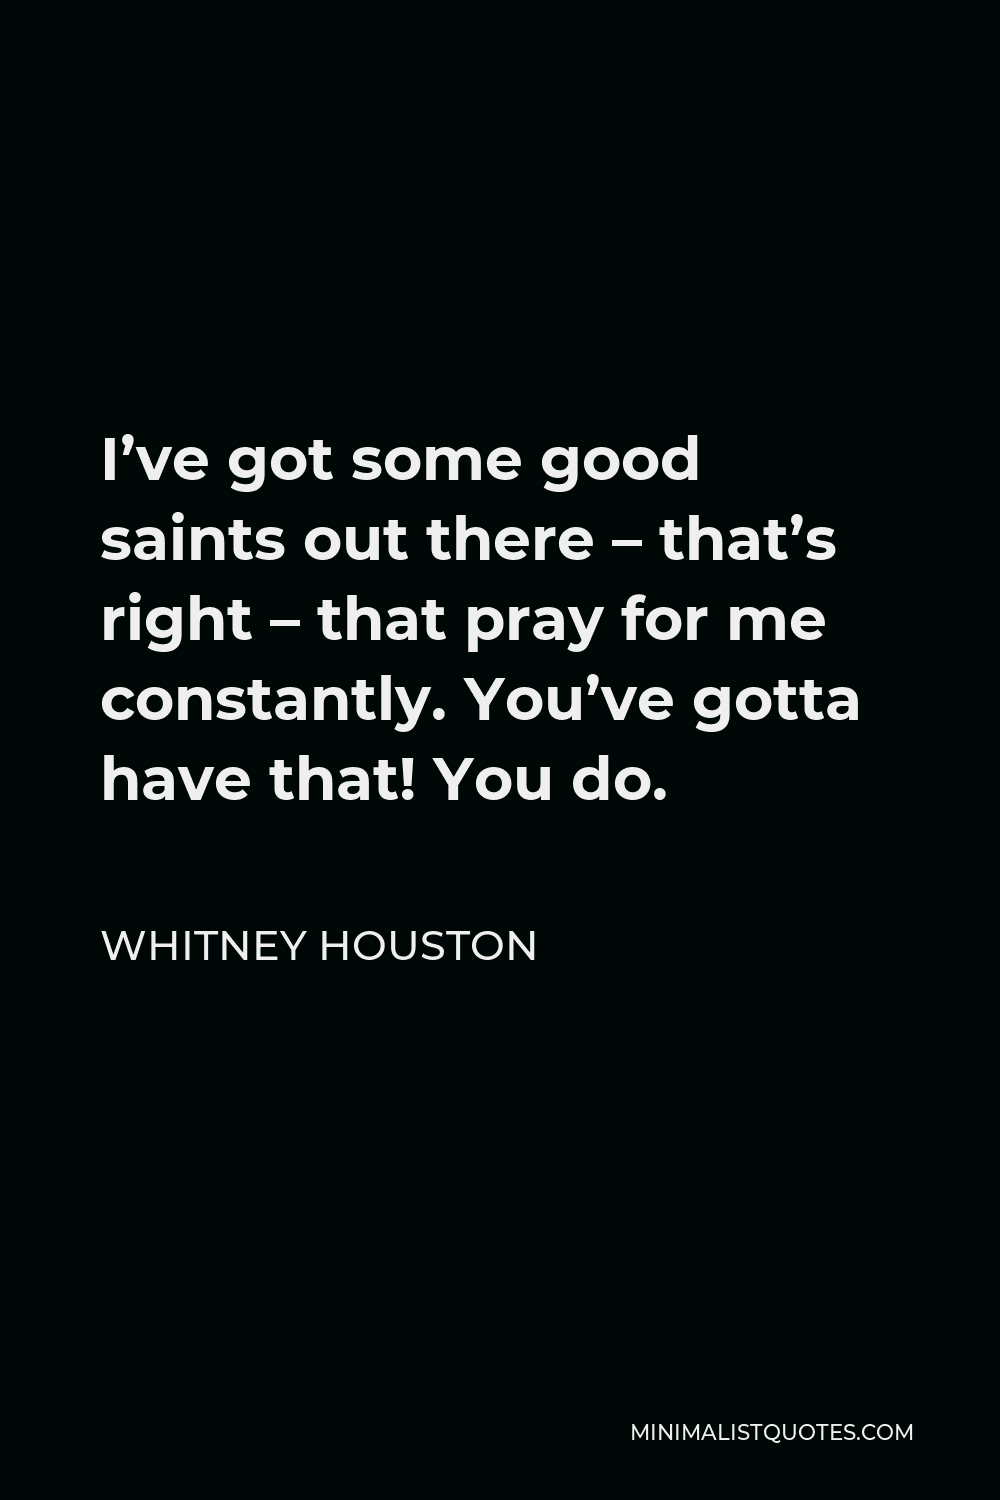 Whitney Houston Quote - I’ve got some good saints out there – that’s right – that pray for me constantly. You’ve gotta have that! You do.